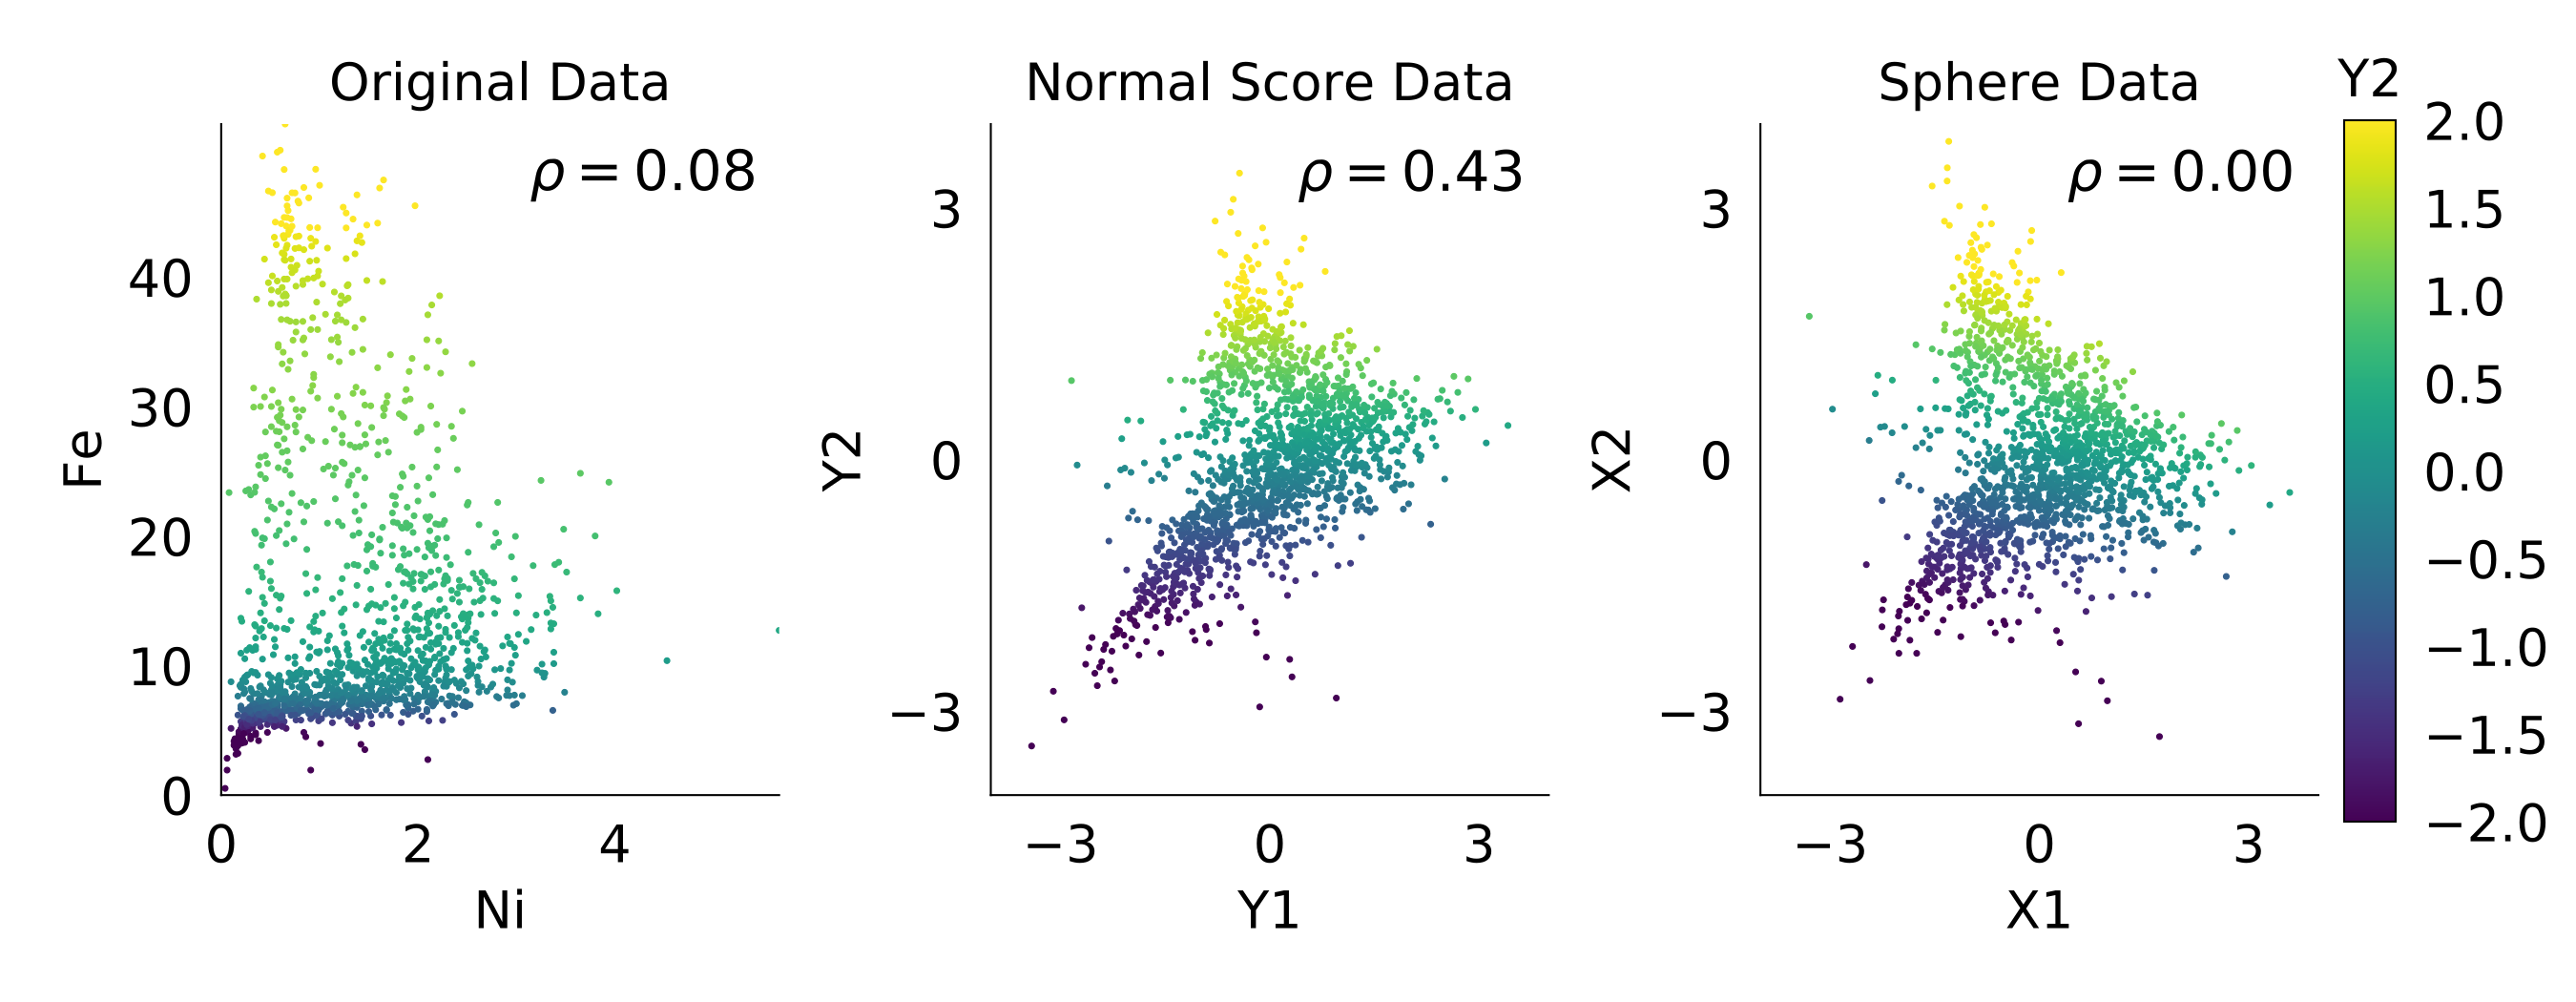 Scatter plots of the original, normal score and sphered data.